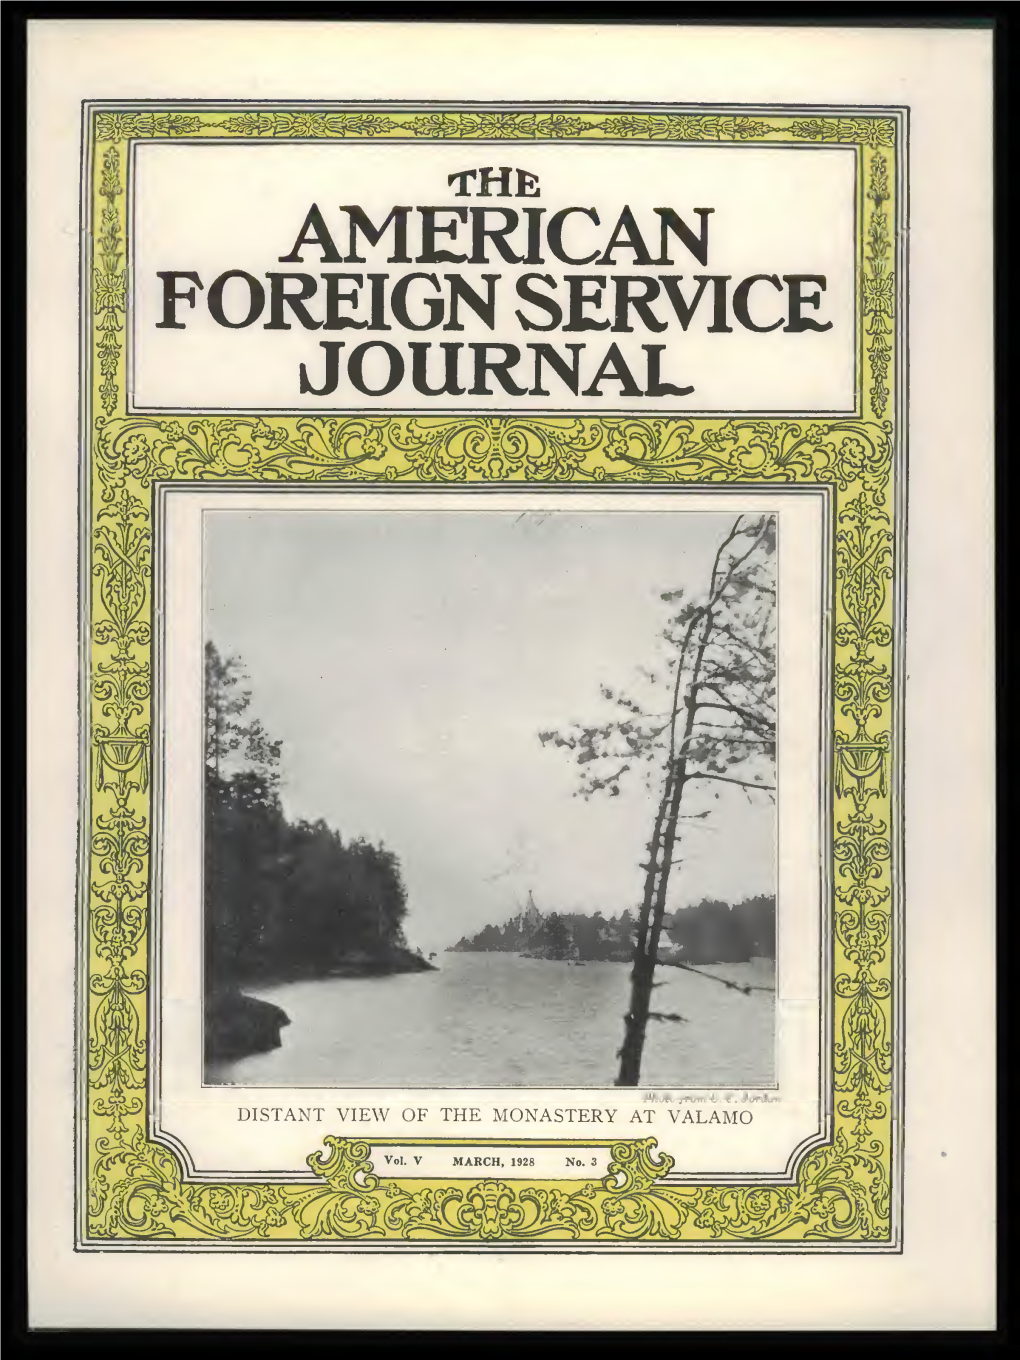 The Foreign Service Journal, March 1928